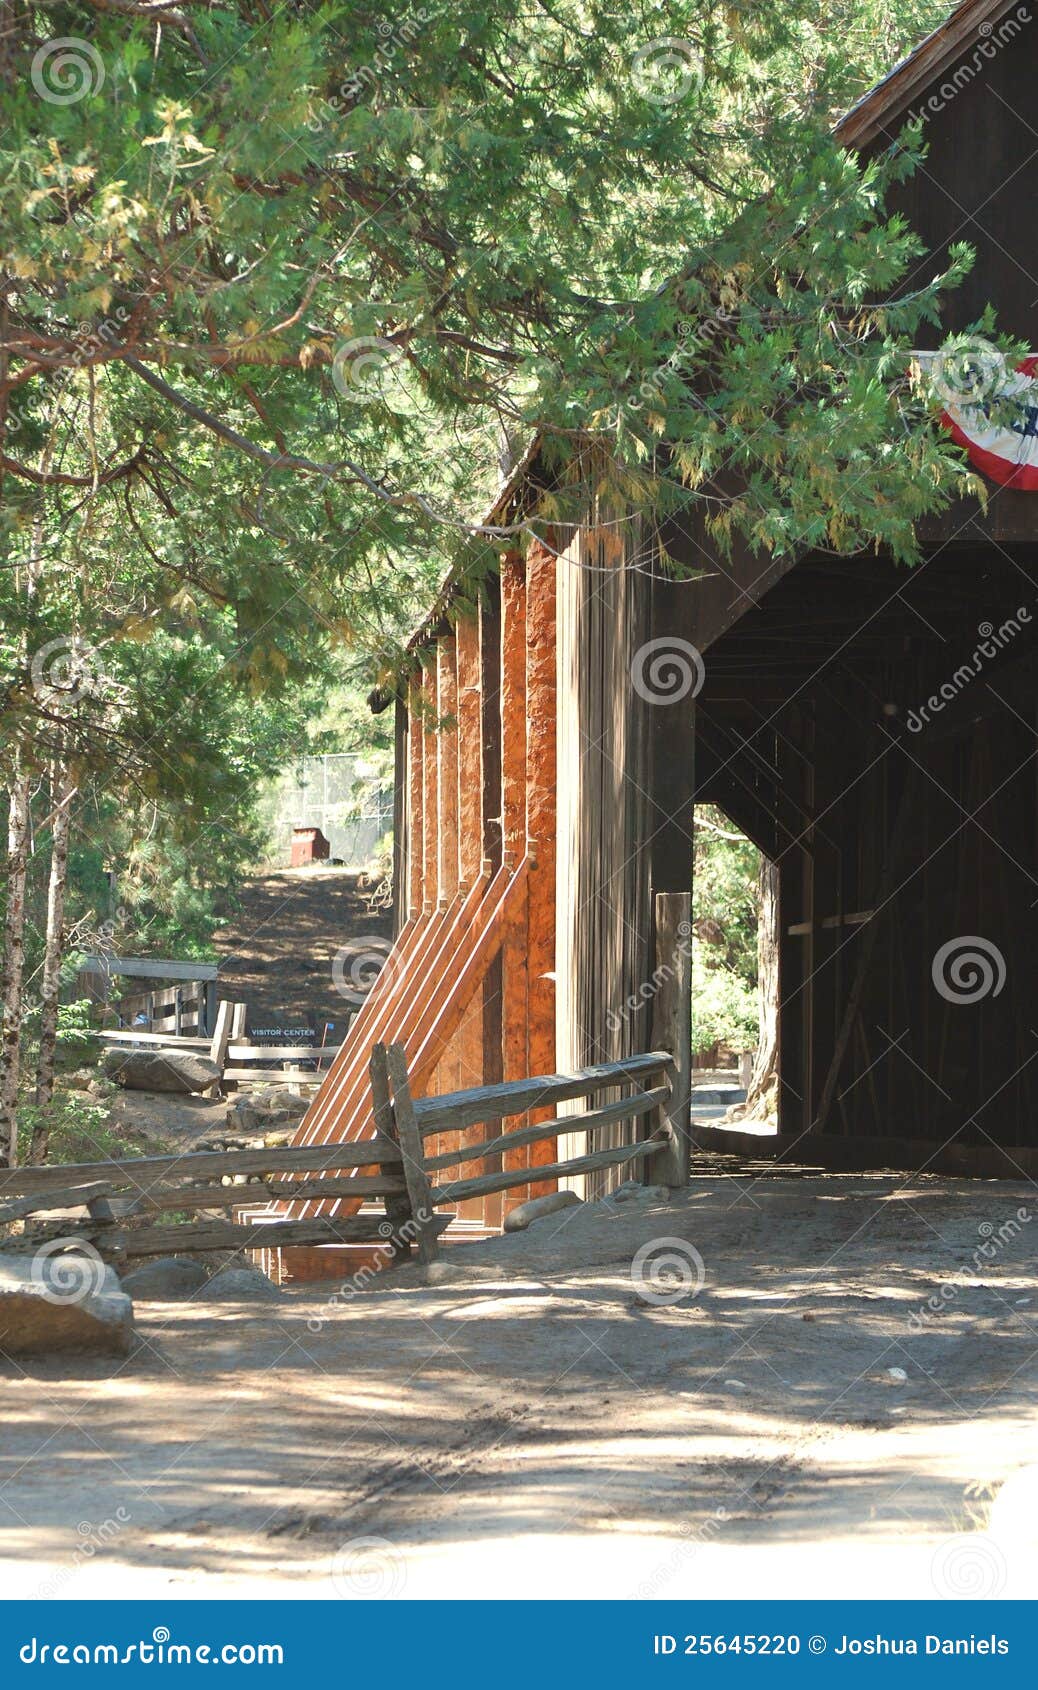 wooden covered bridge over a river in the sierras